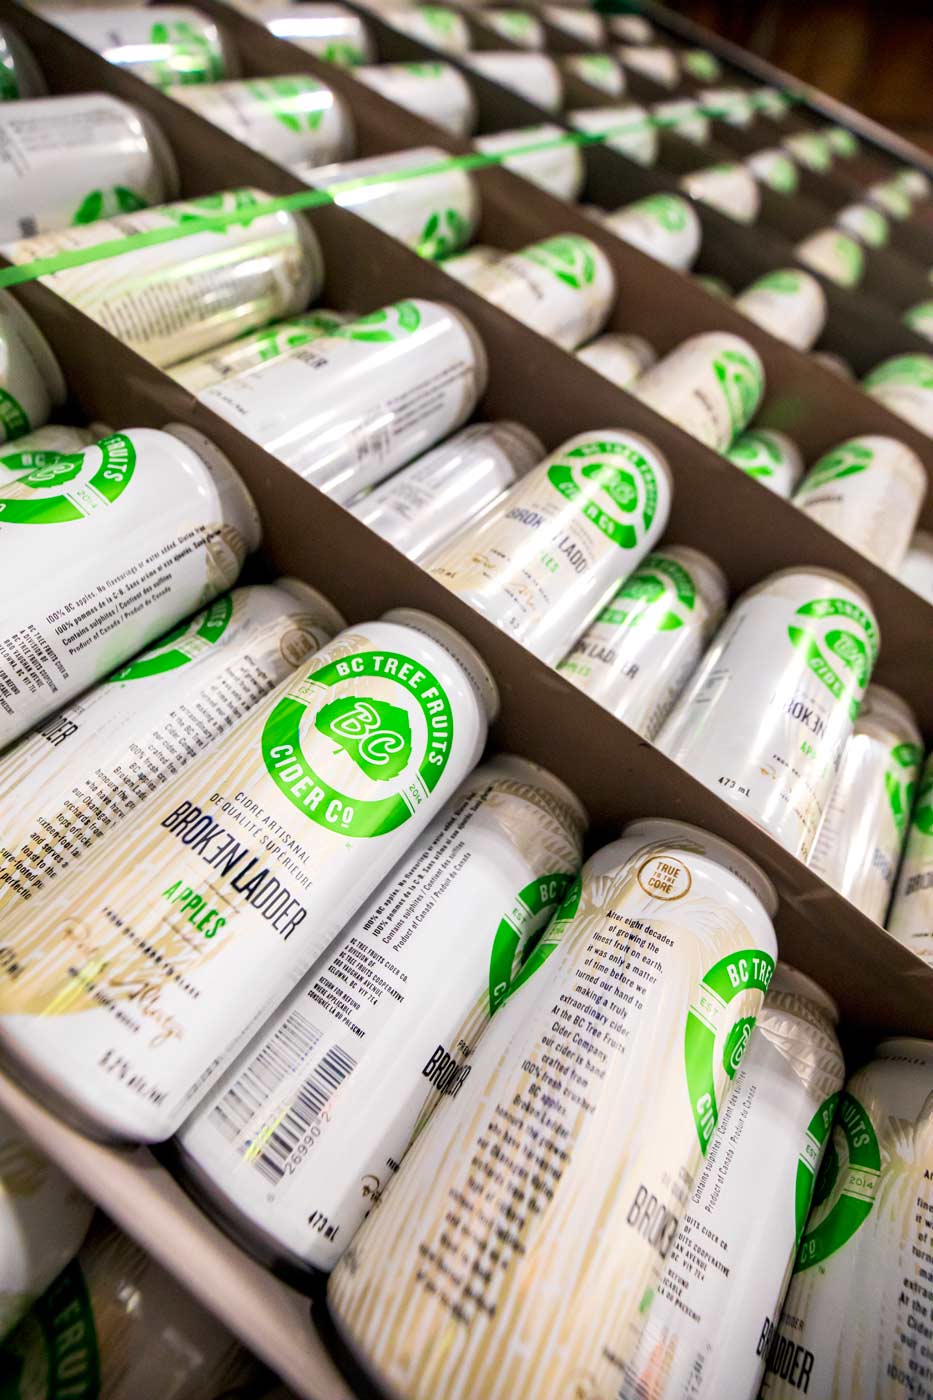 BC Tree Fruits' Broken Ladder "Apples" branded cider, which exclusively uses desert apple and pear varieties that otherwise would be cull fruit at their downtown Kelowna, British Columbia, facility on July 20, 2018. (TJ Mullinax/Good Fruit Grower)